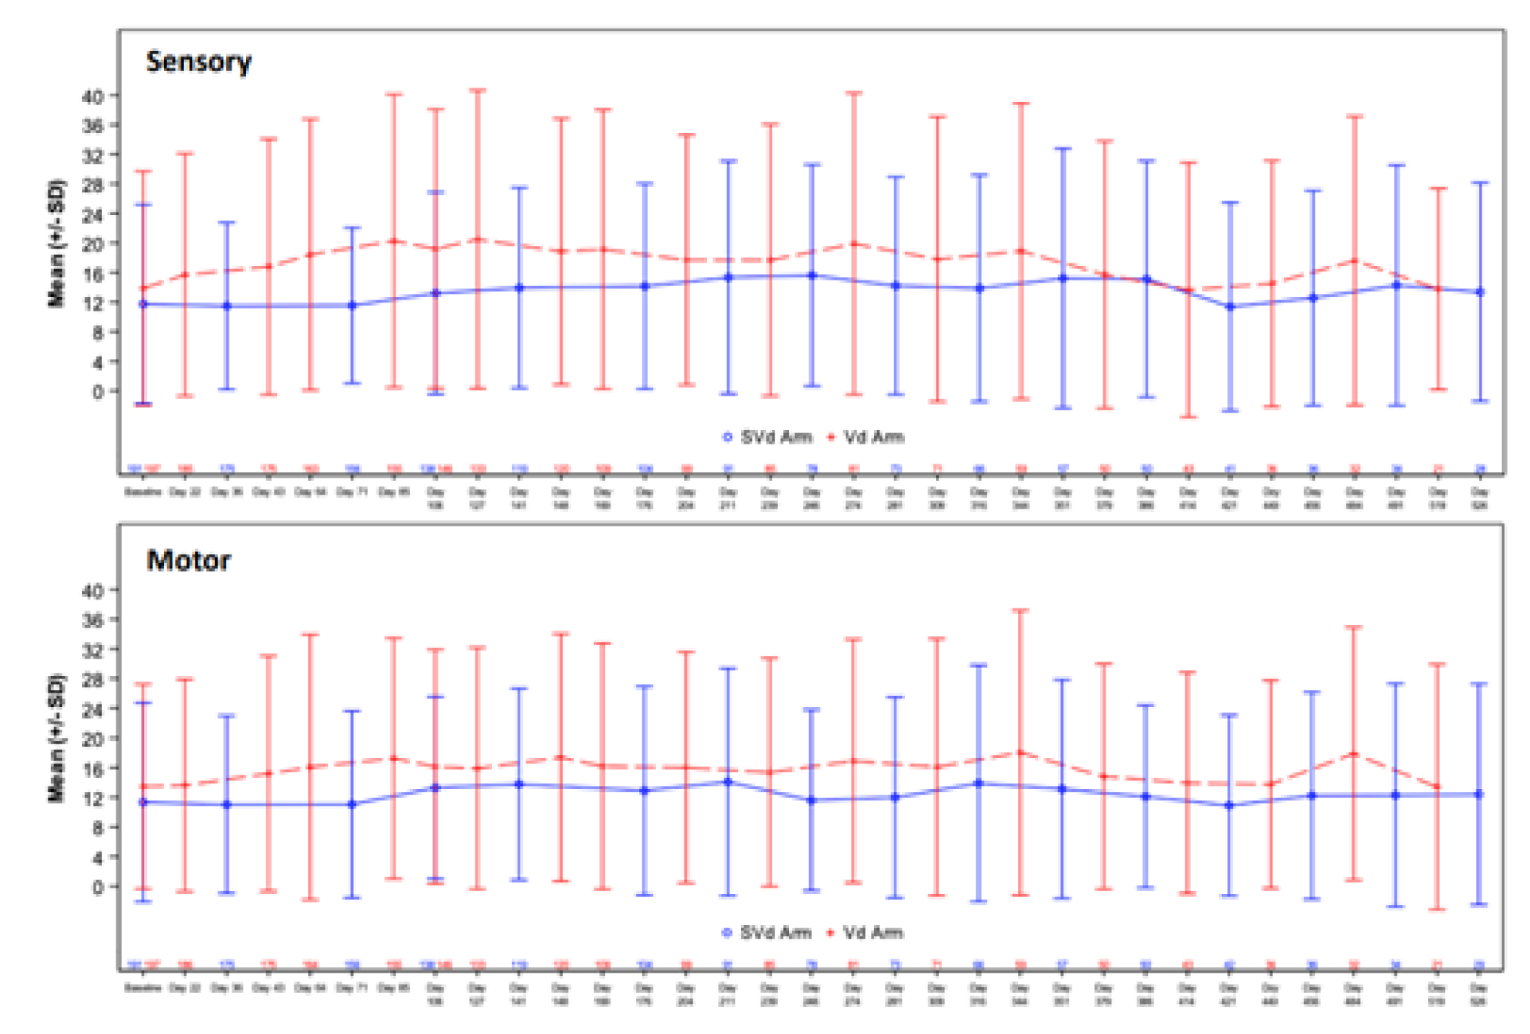 Point estimate graph of mean scores and standard deviation of the EORTC QLQ-CIPN20 Peripheral Neuropathy Sensory and Motor Symptom scales for the SVd and Vd groups over time.